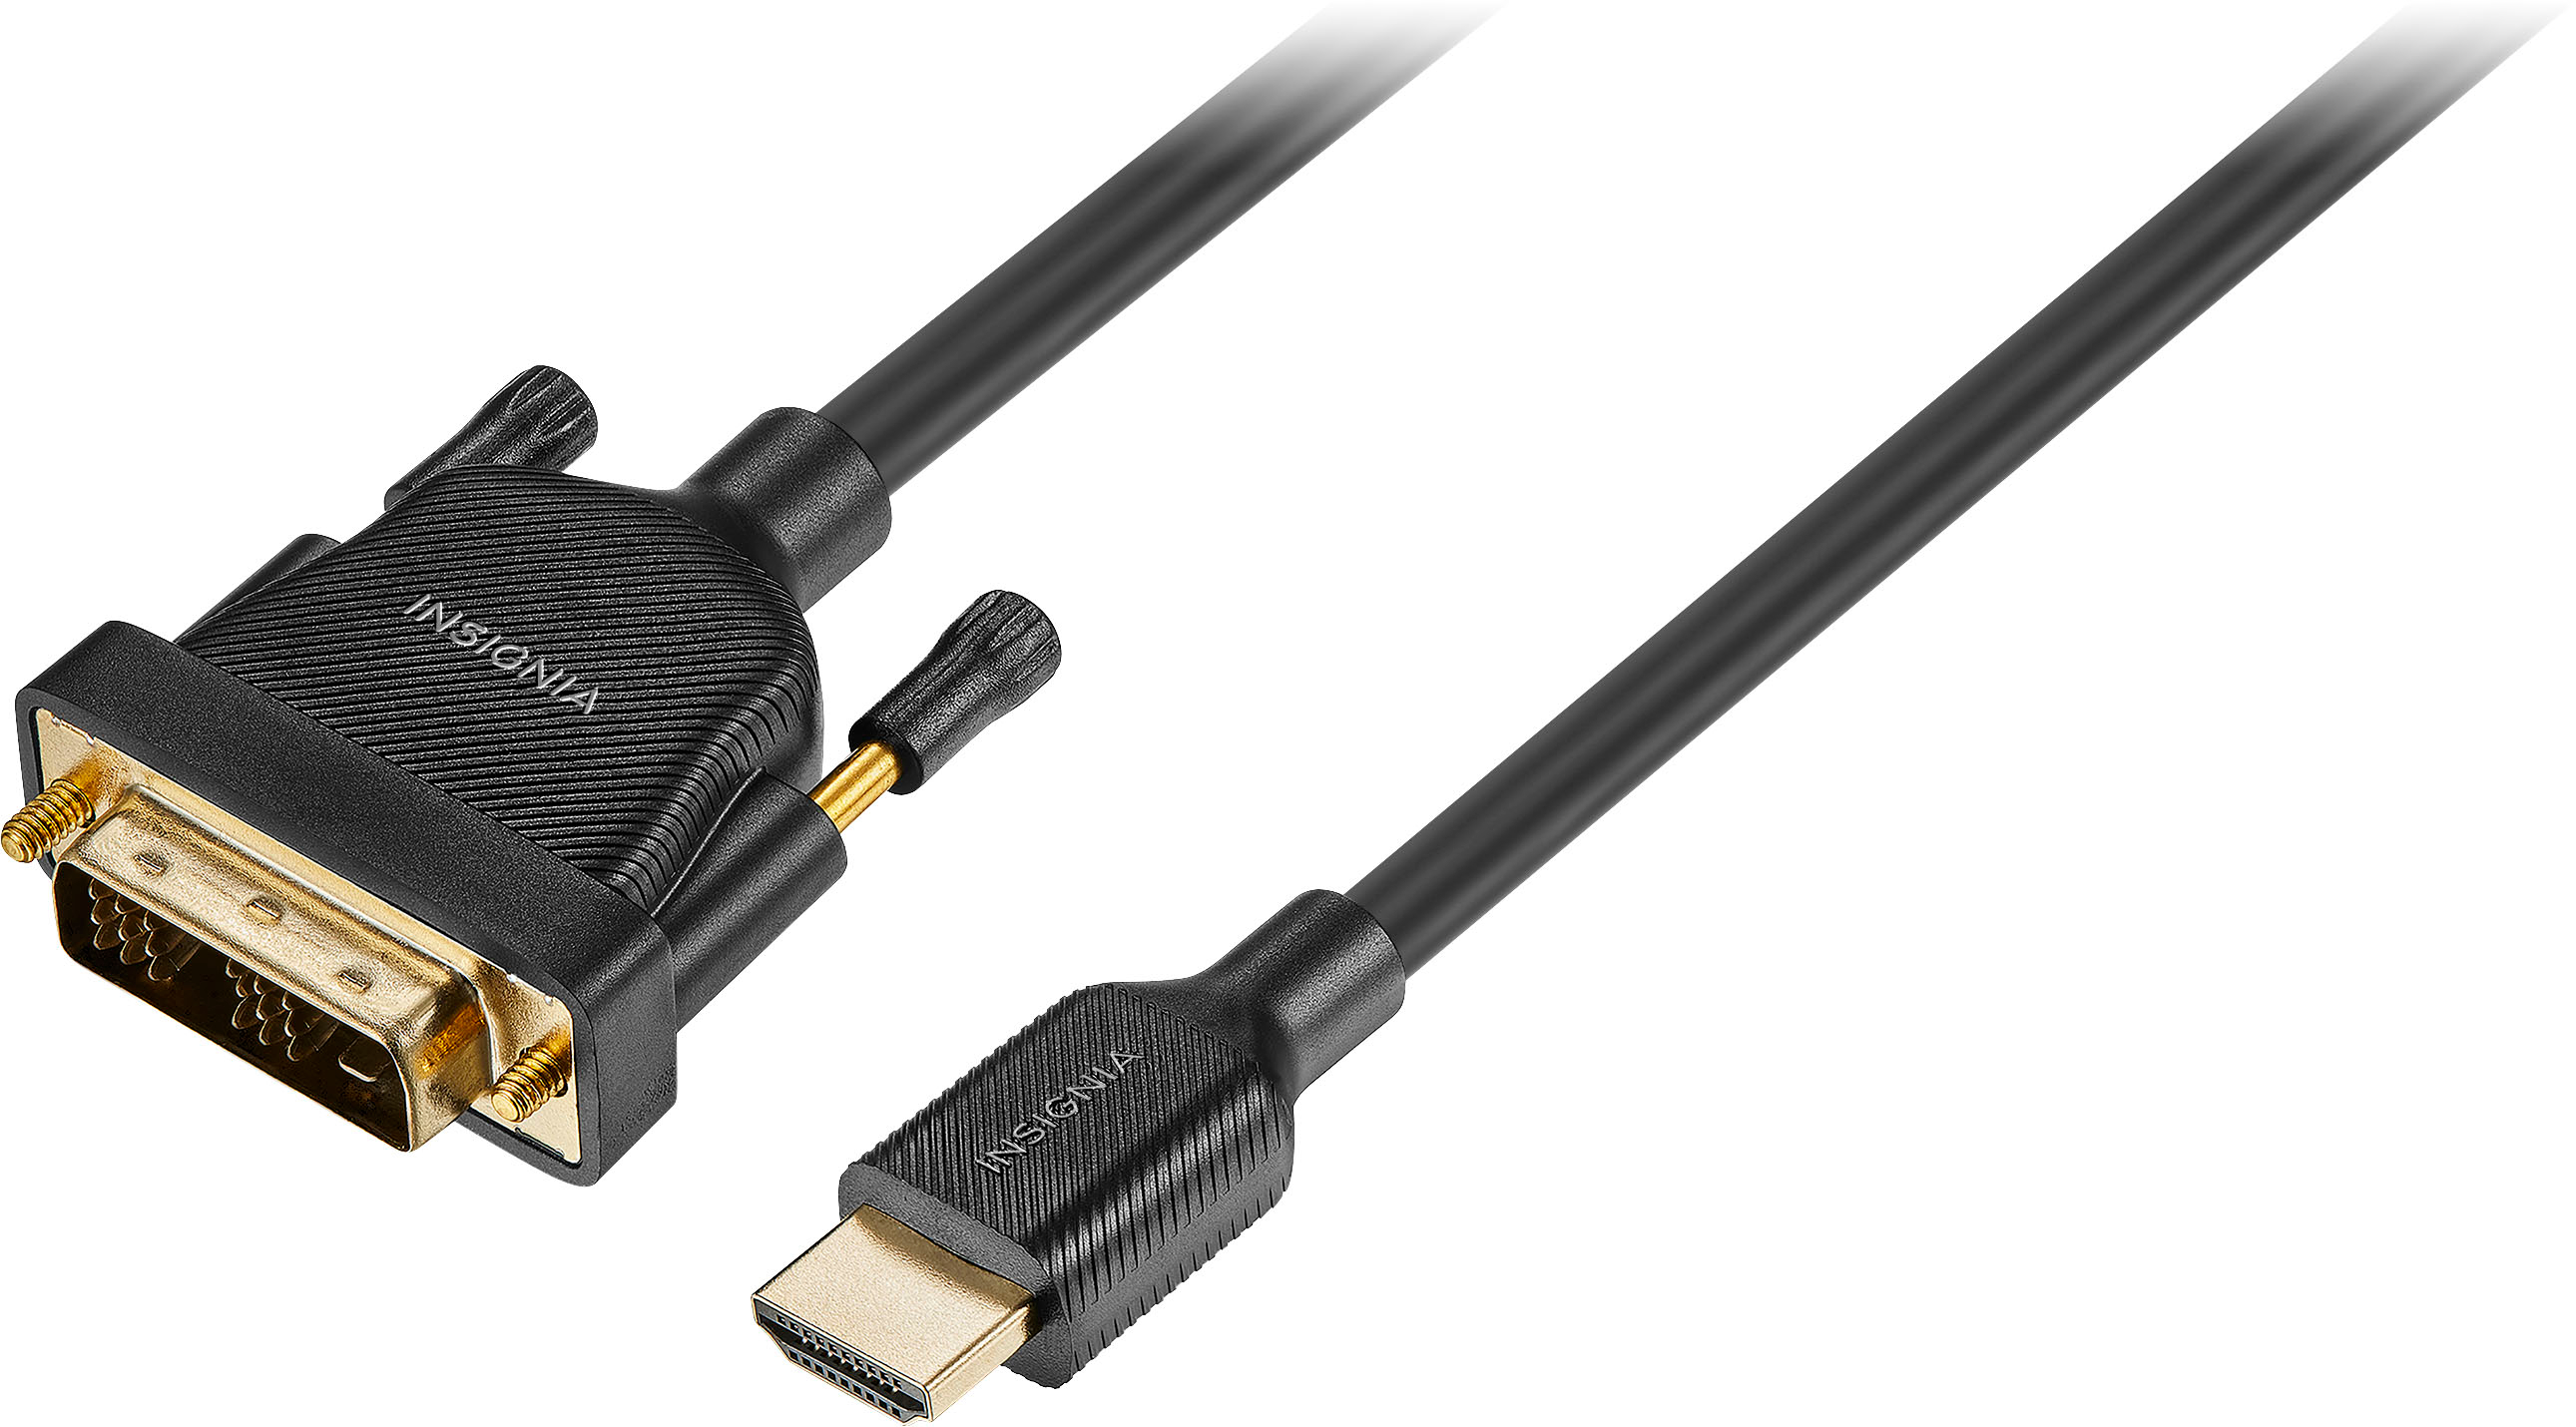 HDMI to DVI-D High Definition Video Cable